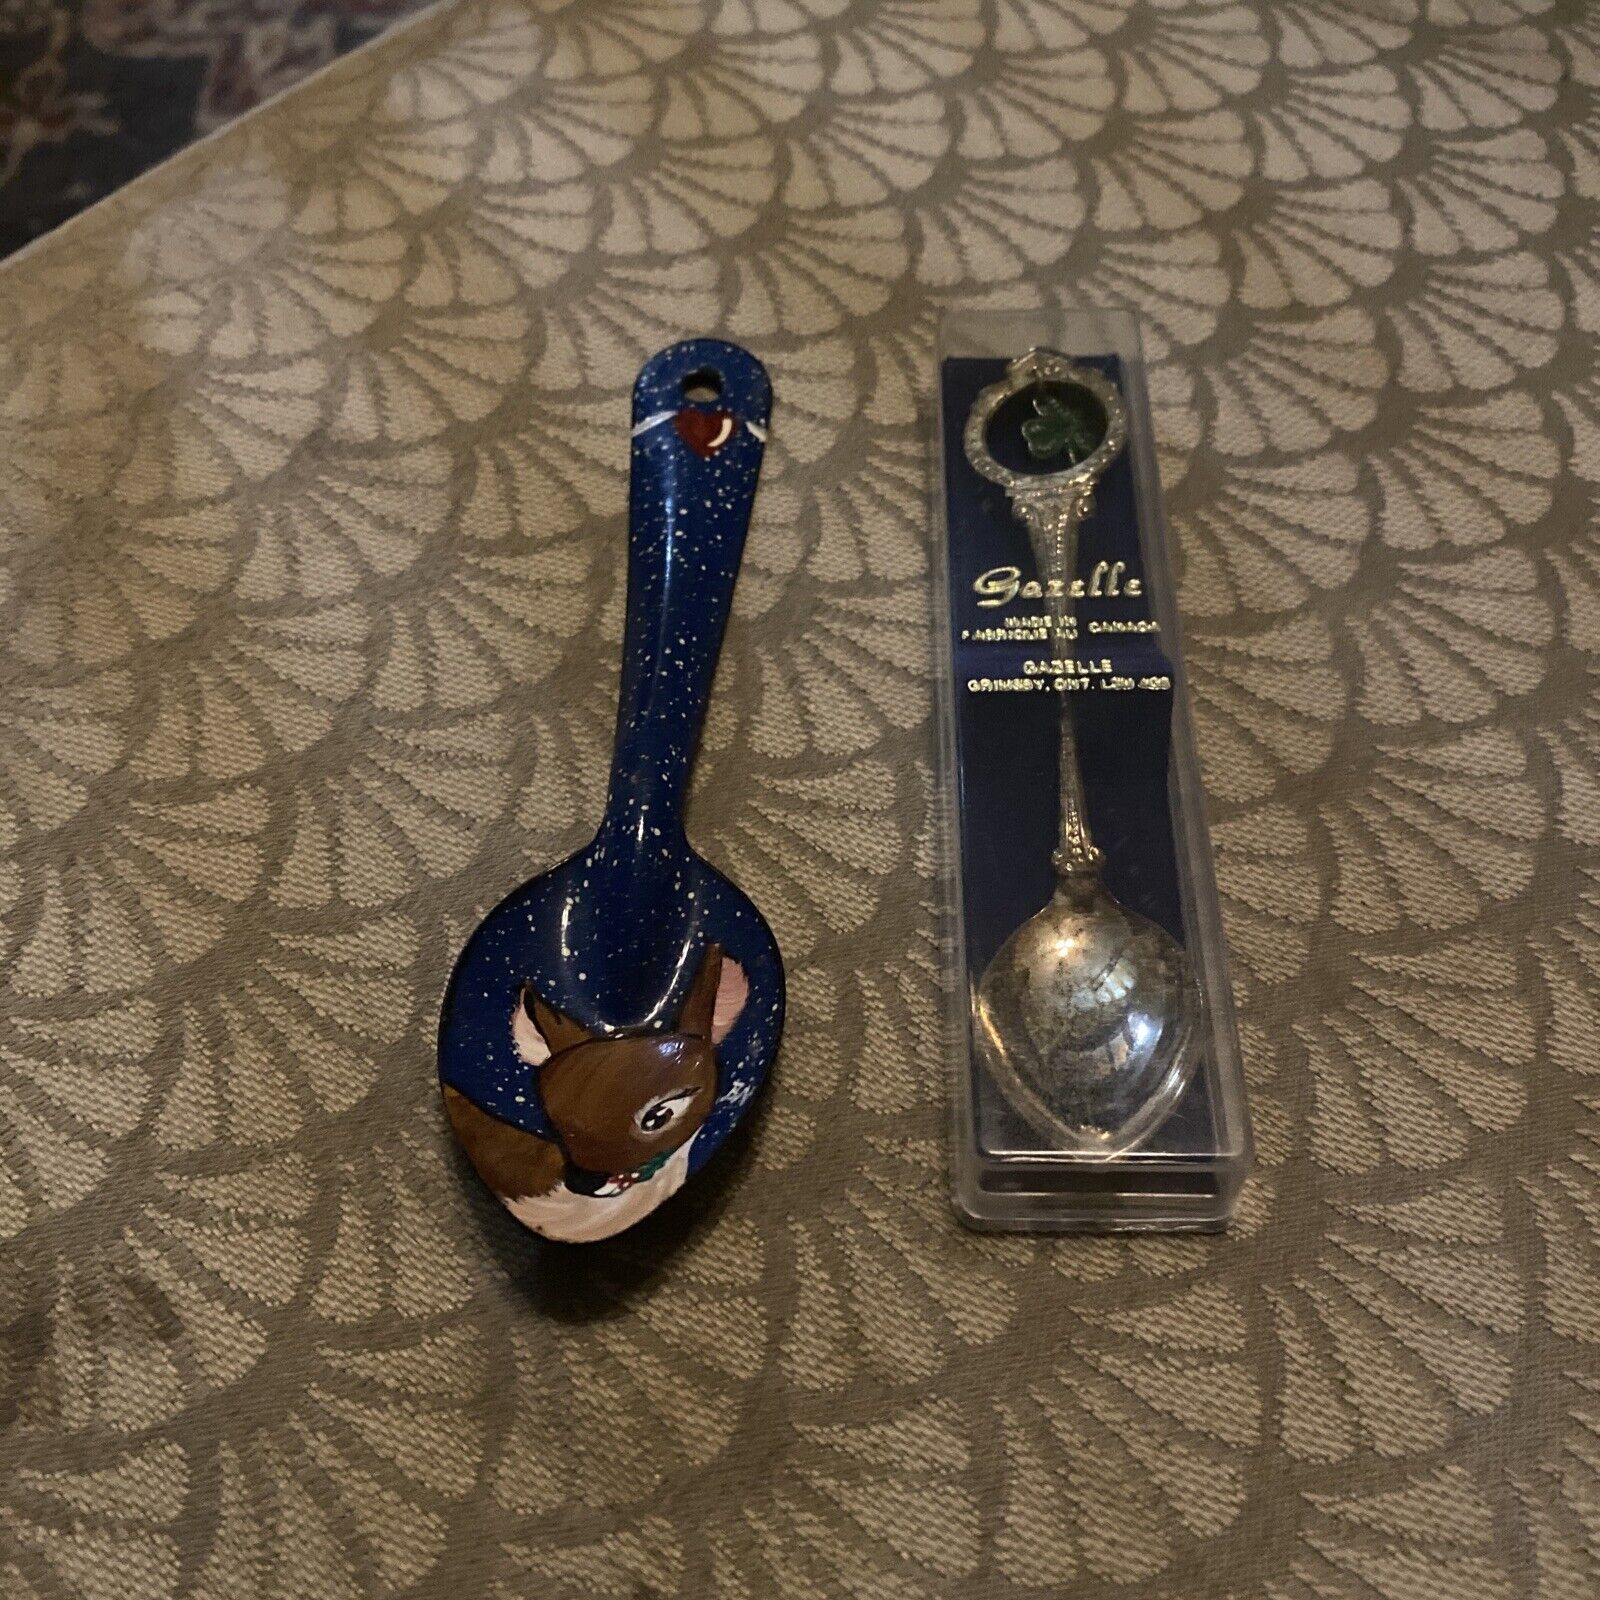 2 collector spoons